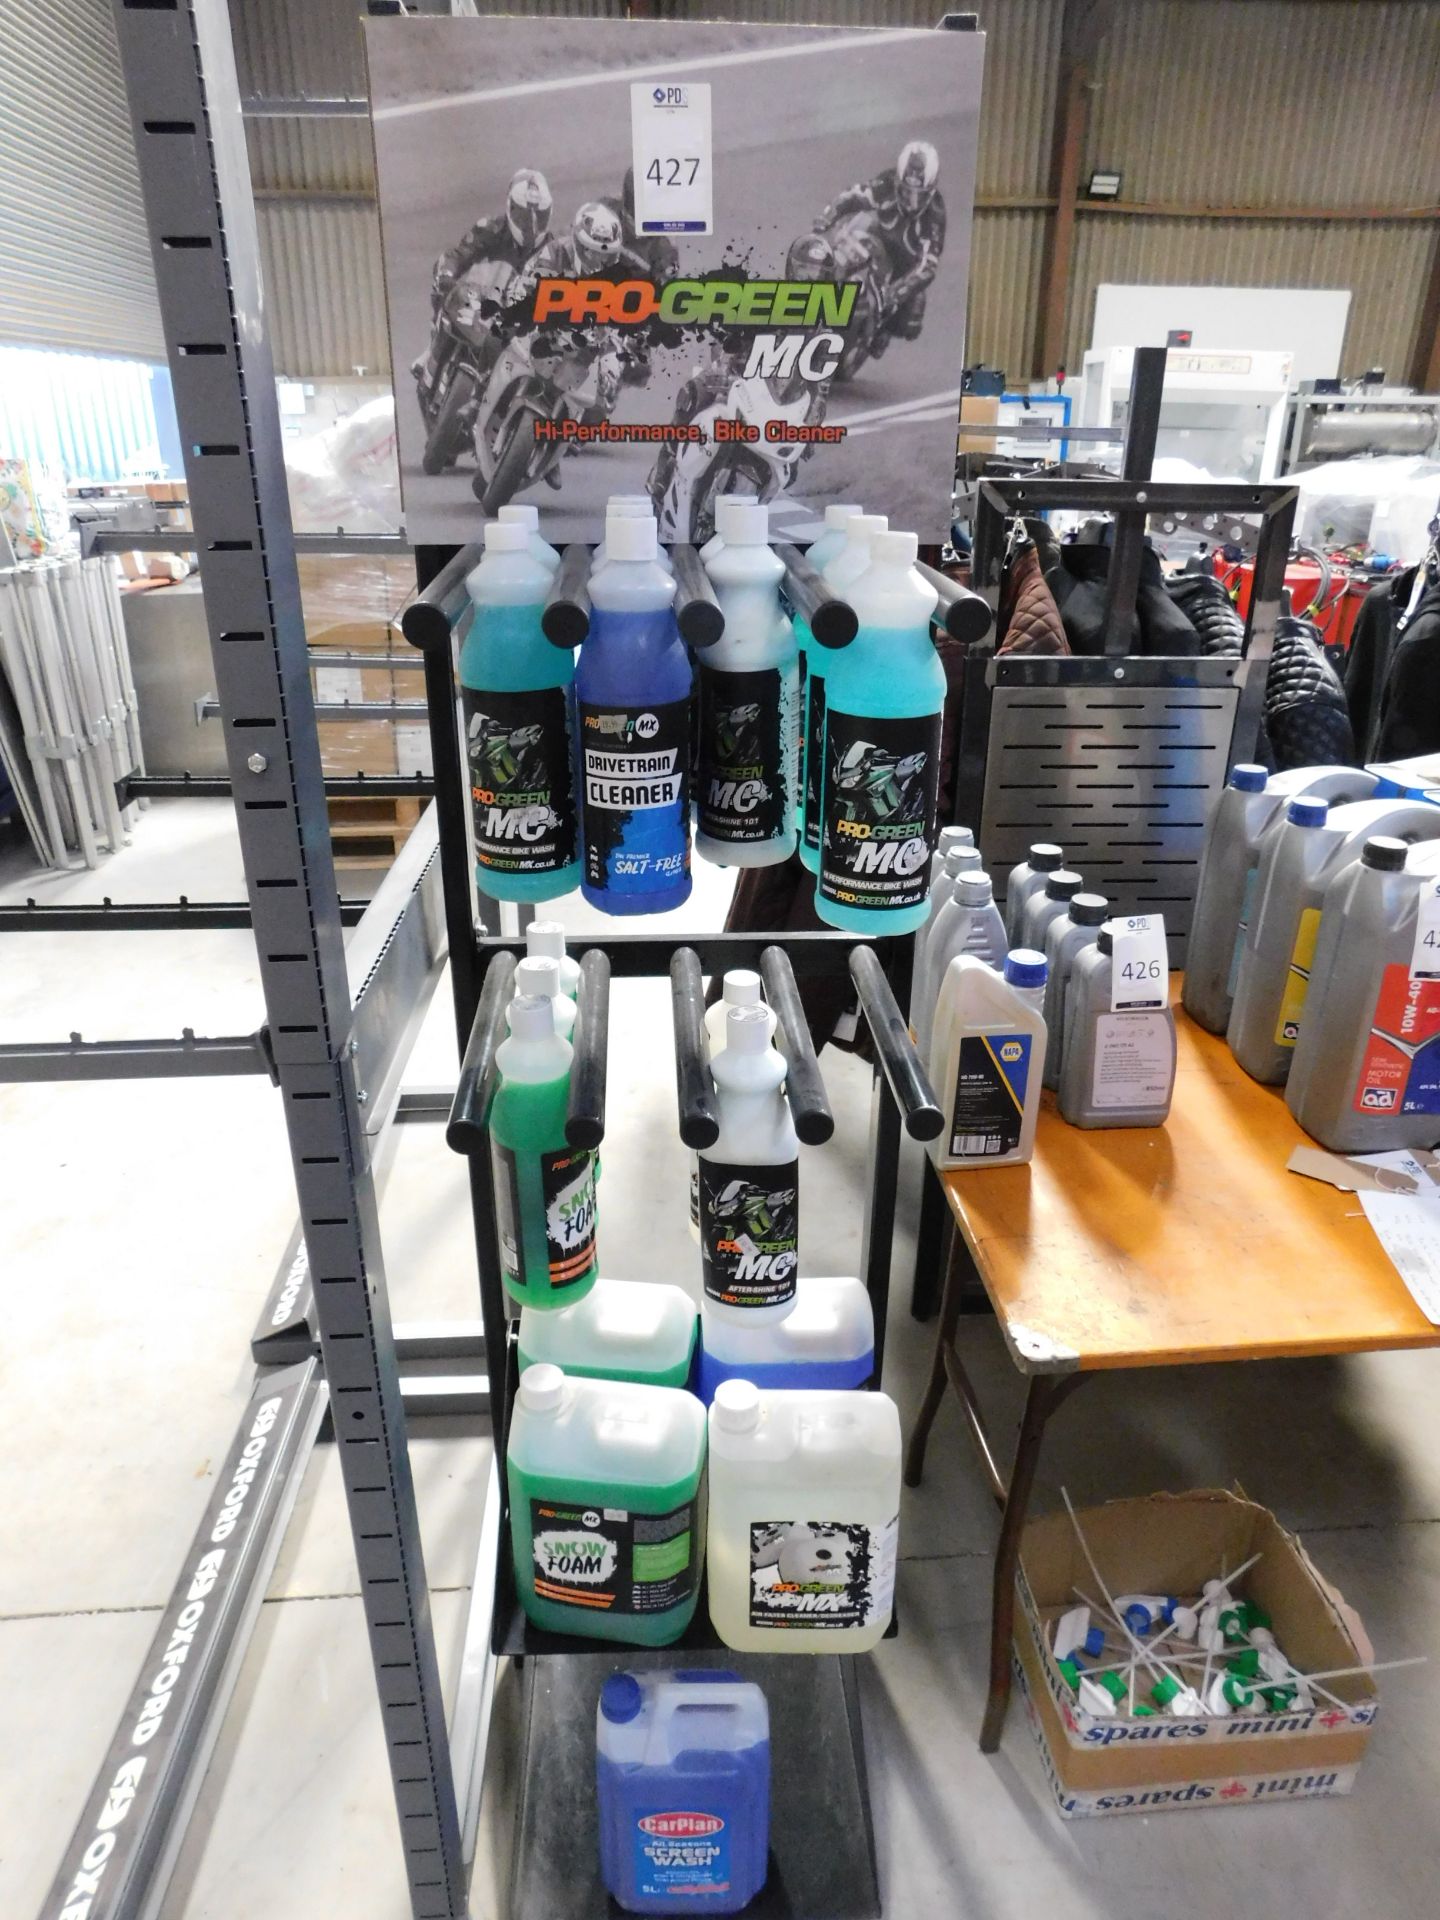 Pro Green M/C Cleaning Products Merchandises & Stock, 15 1L & Five 5L Cleaners (Location: Brentwood.